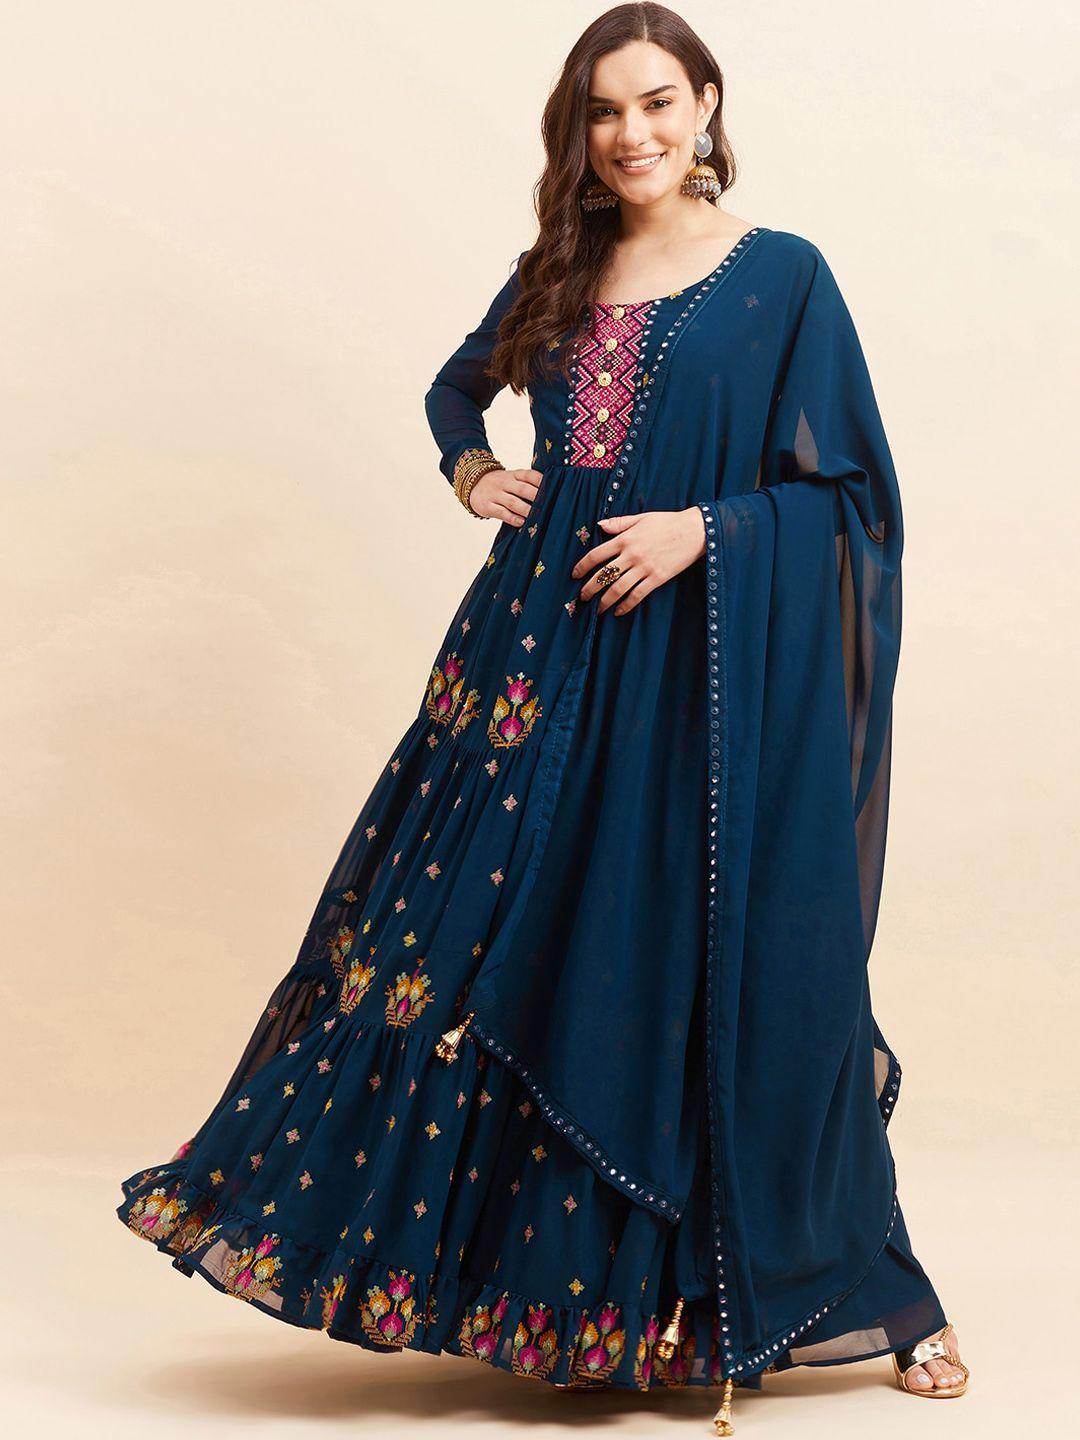 kalini-ethnic-motifs-embroidered-georgette-fit-and-flare-maxi-ethnic-dresses-with-dupatta